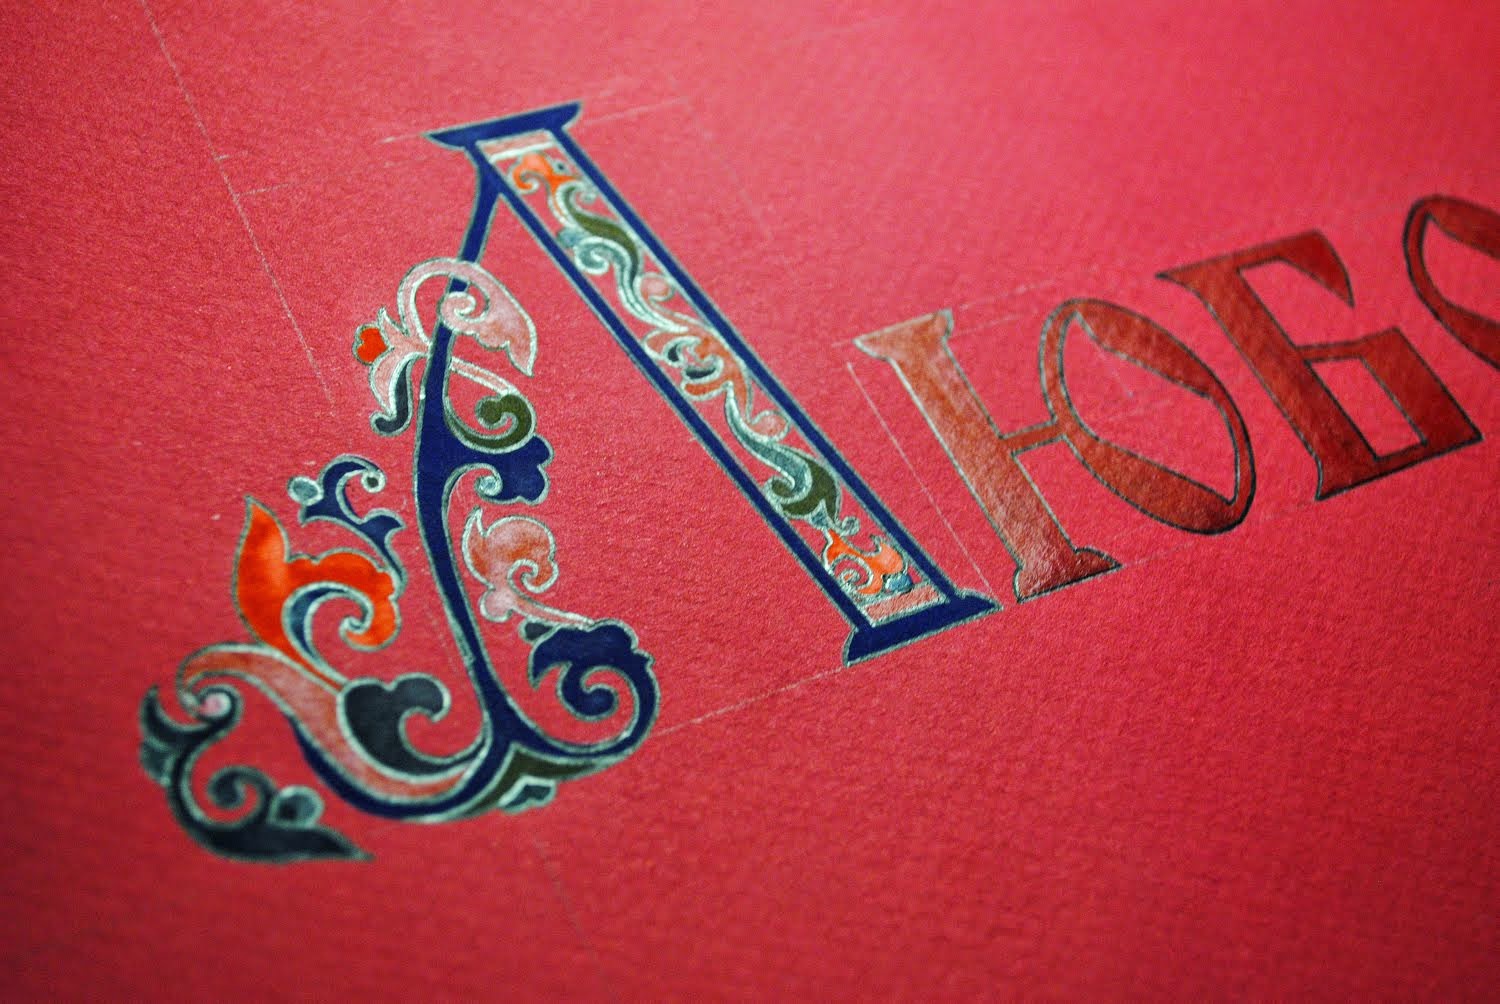 ЛЮБОВЬ / LOVE. LETTER. OLD RUSSIAN STYLE. IN THE PROCESS